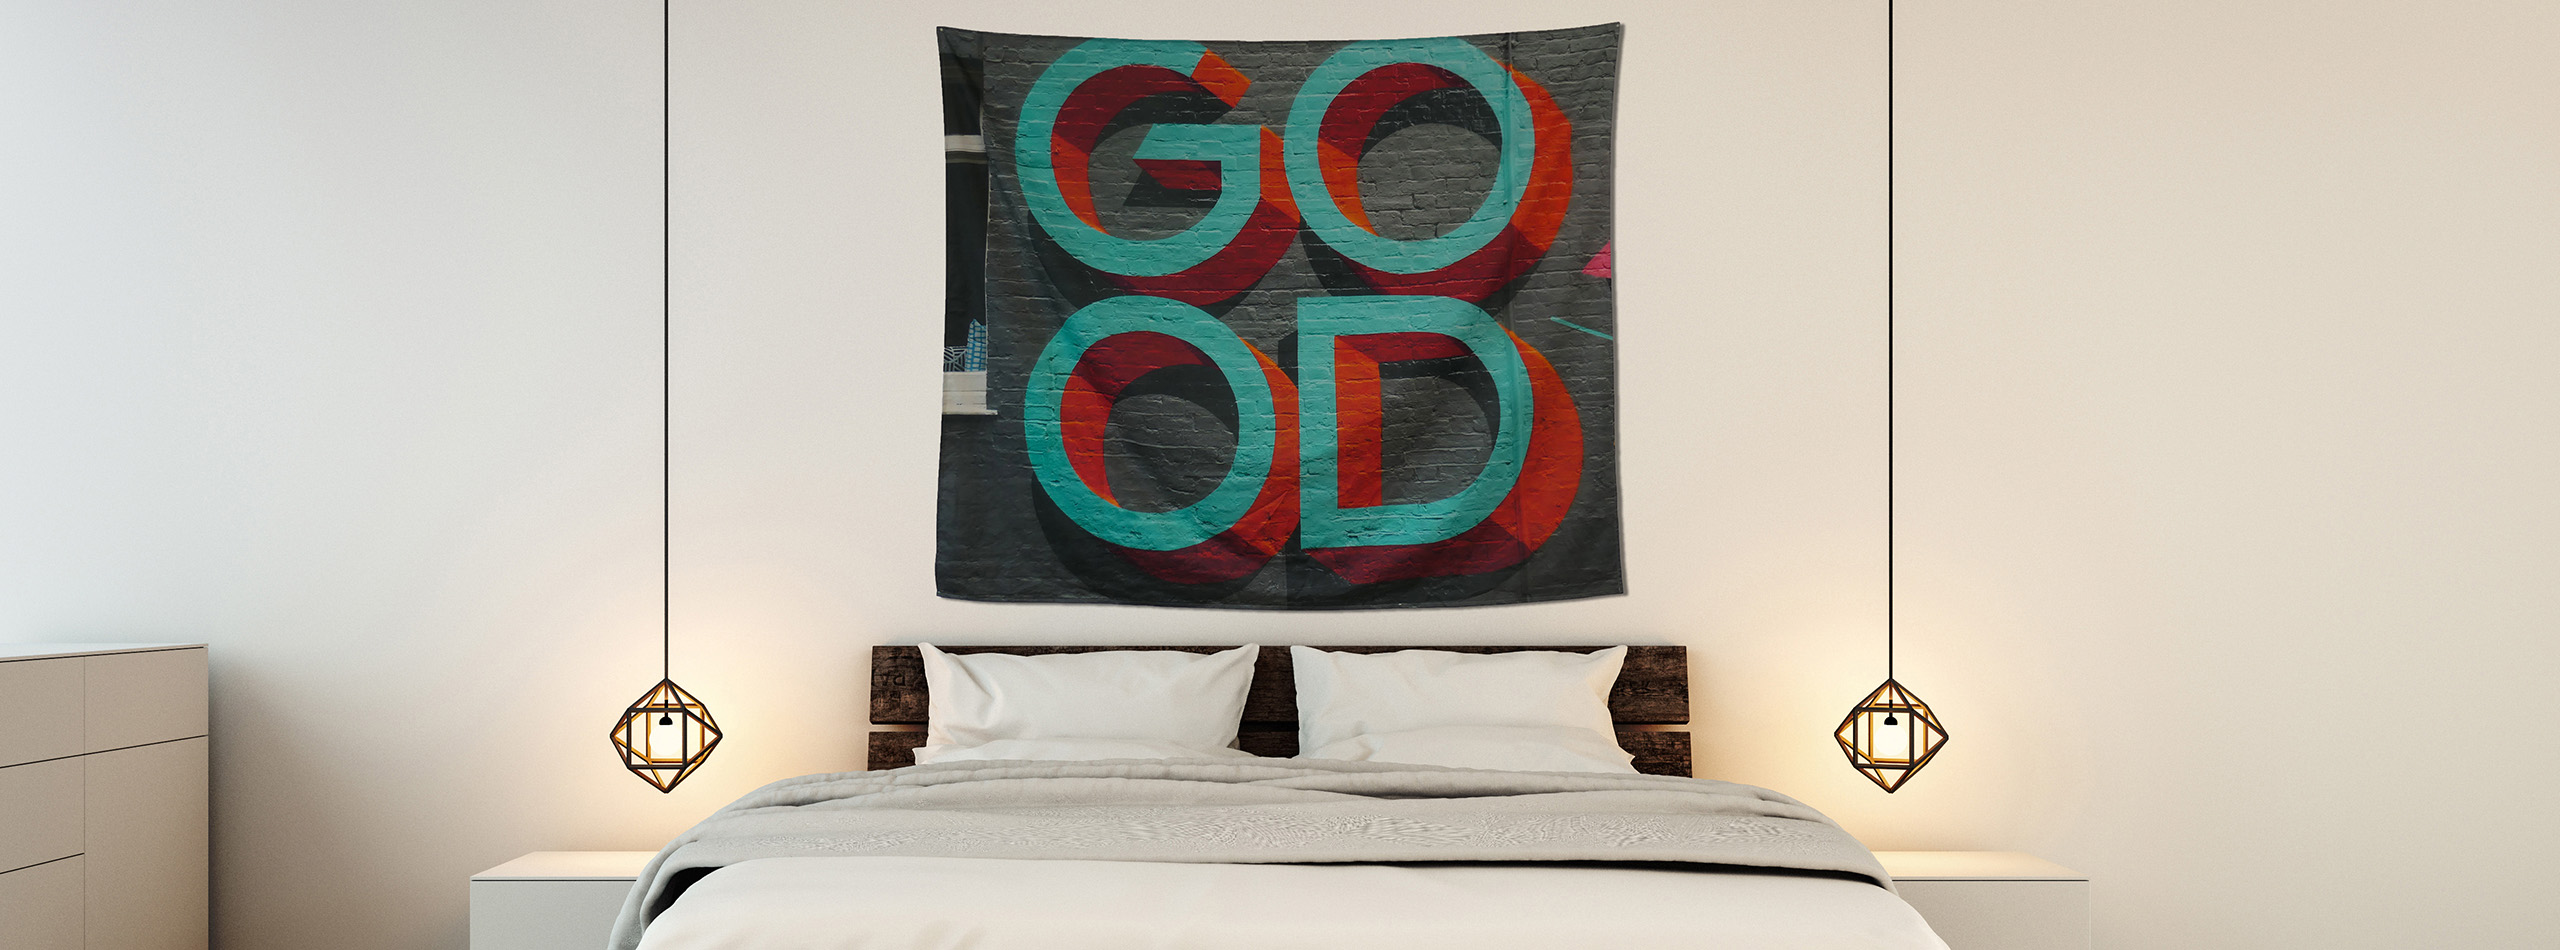 Custom printed cotton sateen wall tapestry hanged over a bed